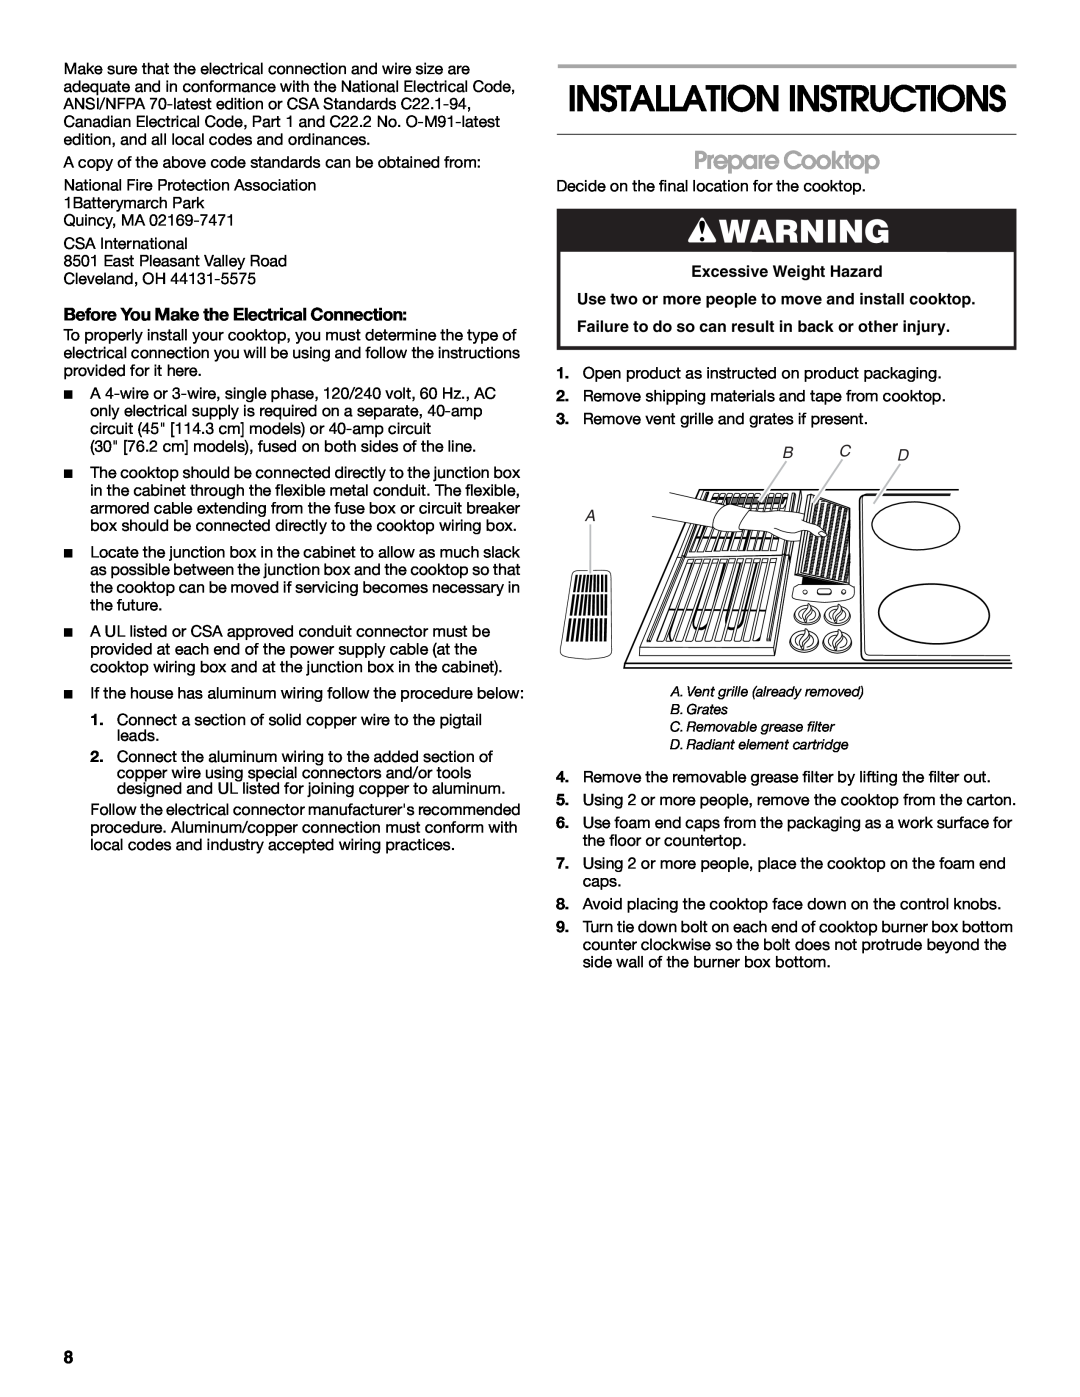 Jenn-Air W10298937B Prepare Cooktop, Before You Make the Electrical Connection, B C D A, Installation Instructions 